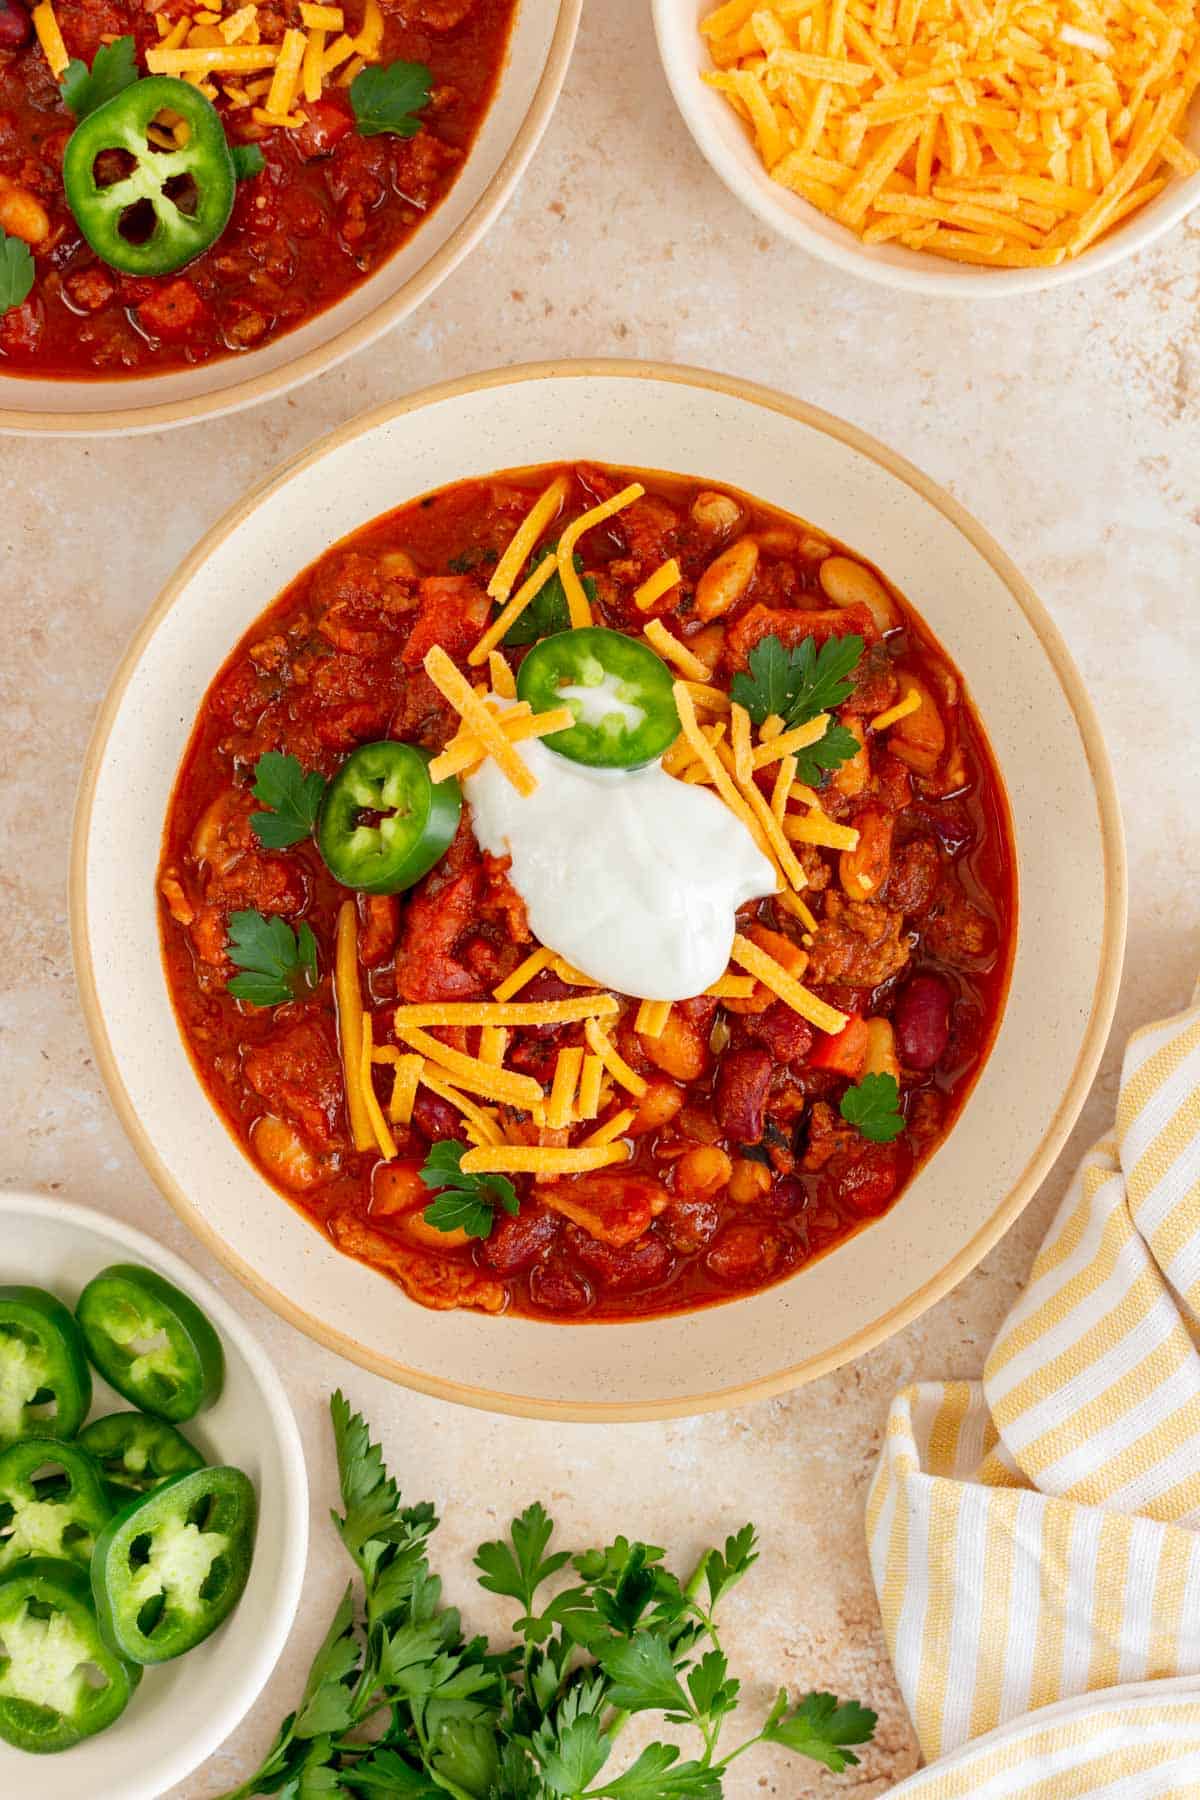 A bowl of Dutch oven chili topped with sour cream, shredded chili, jalapeno, and cilantro. More toppings in bowls on the side.